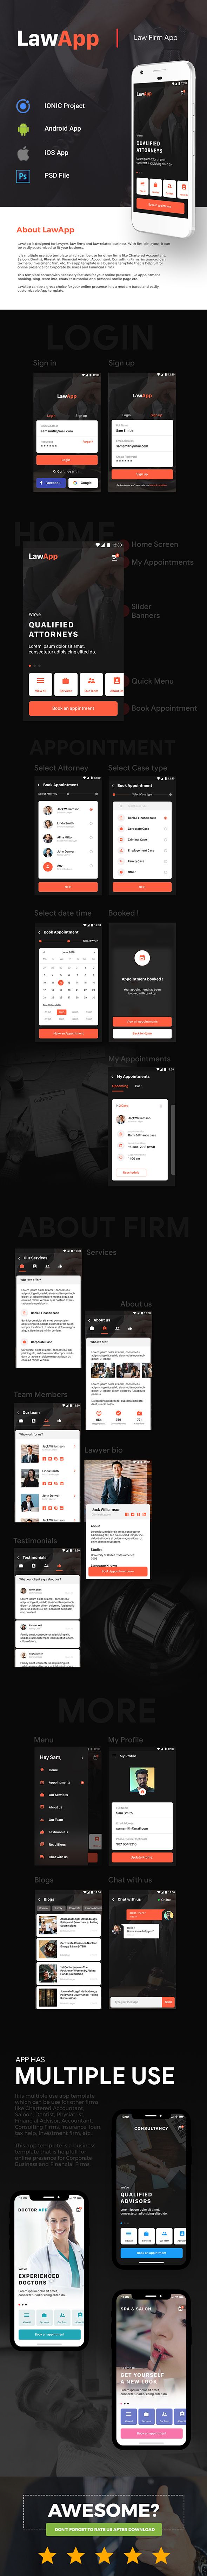 Multiple use |  Law Android App + Law iOS App Template | HTML + Css IONIC 3 | LawApp - 2